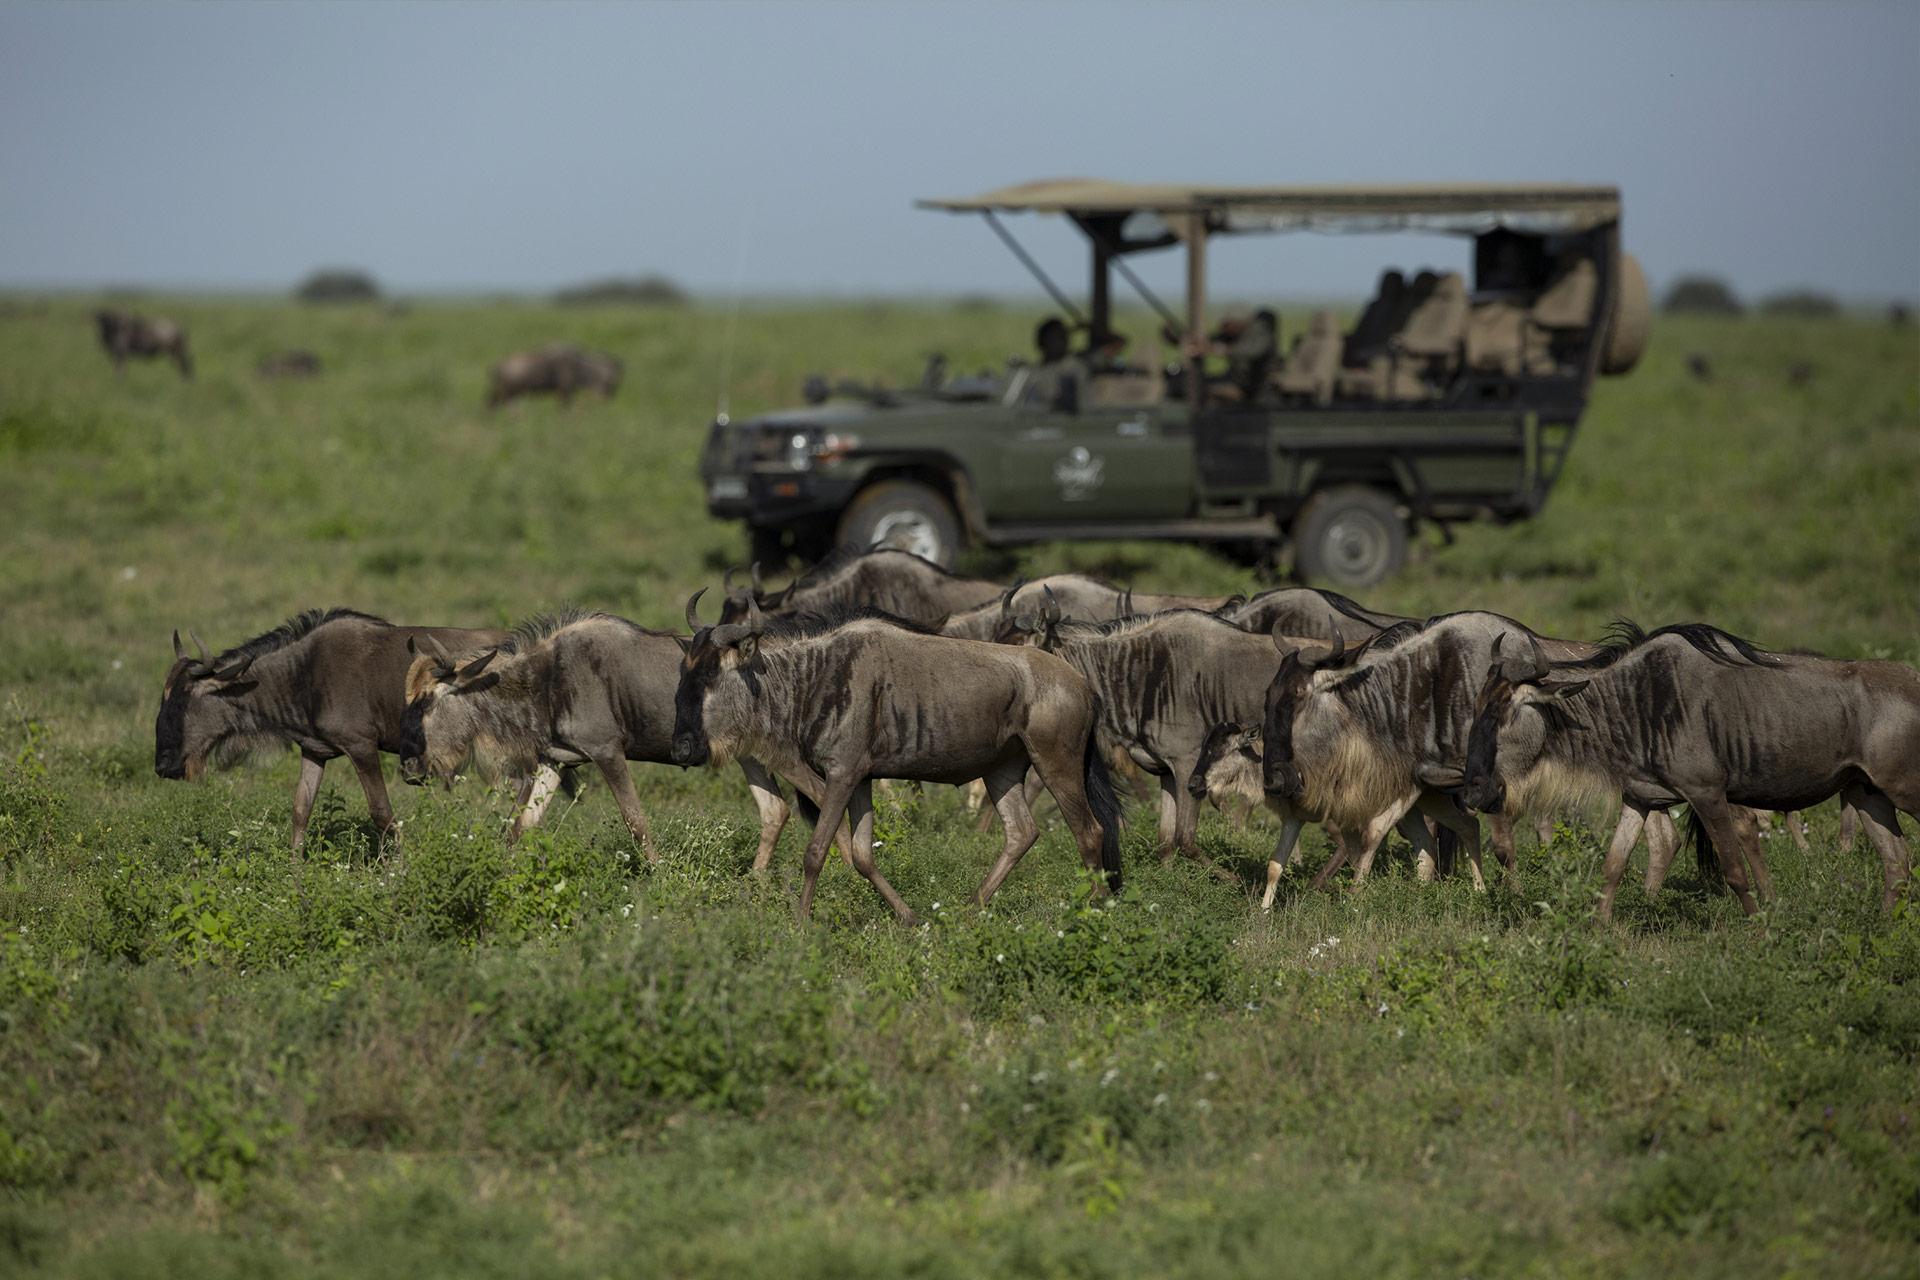 The Wildebeest have moved from one crossing point to the next and back again